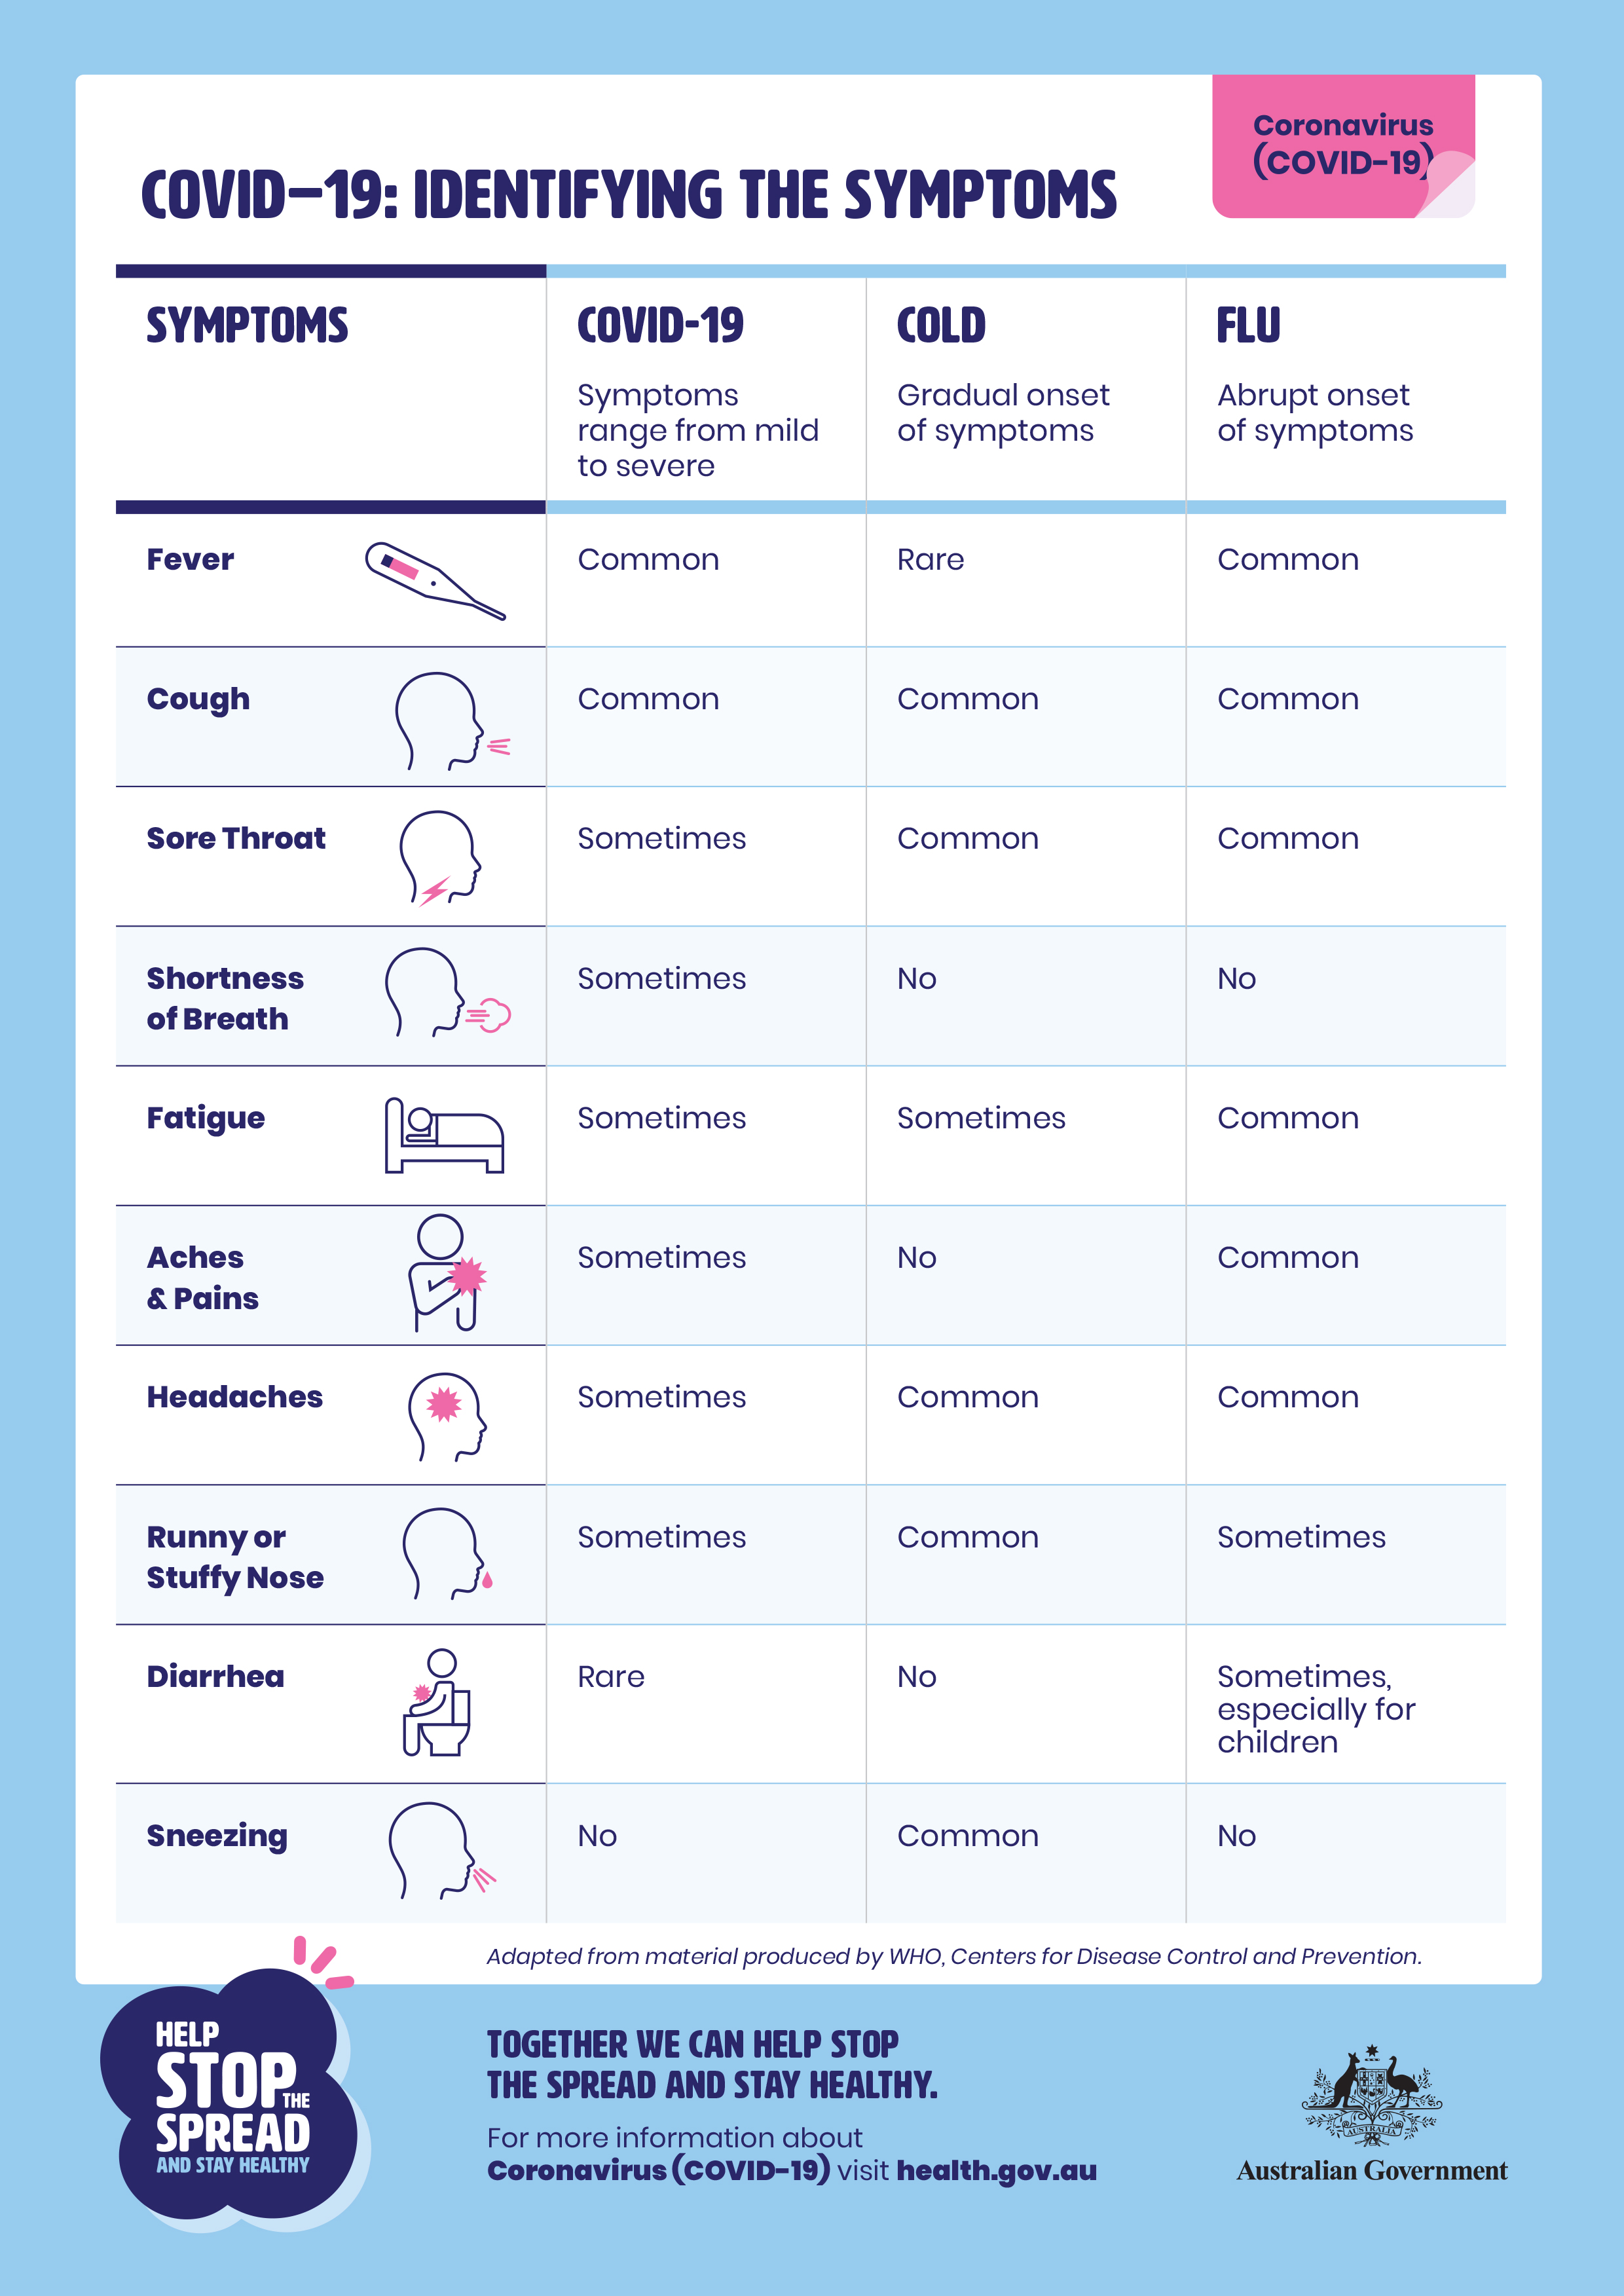 Infographic showing how COVID-19 symptoms compare to cold and flu.